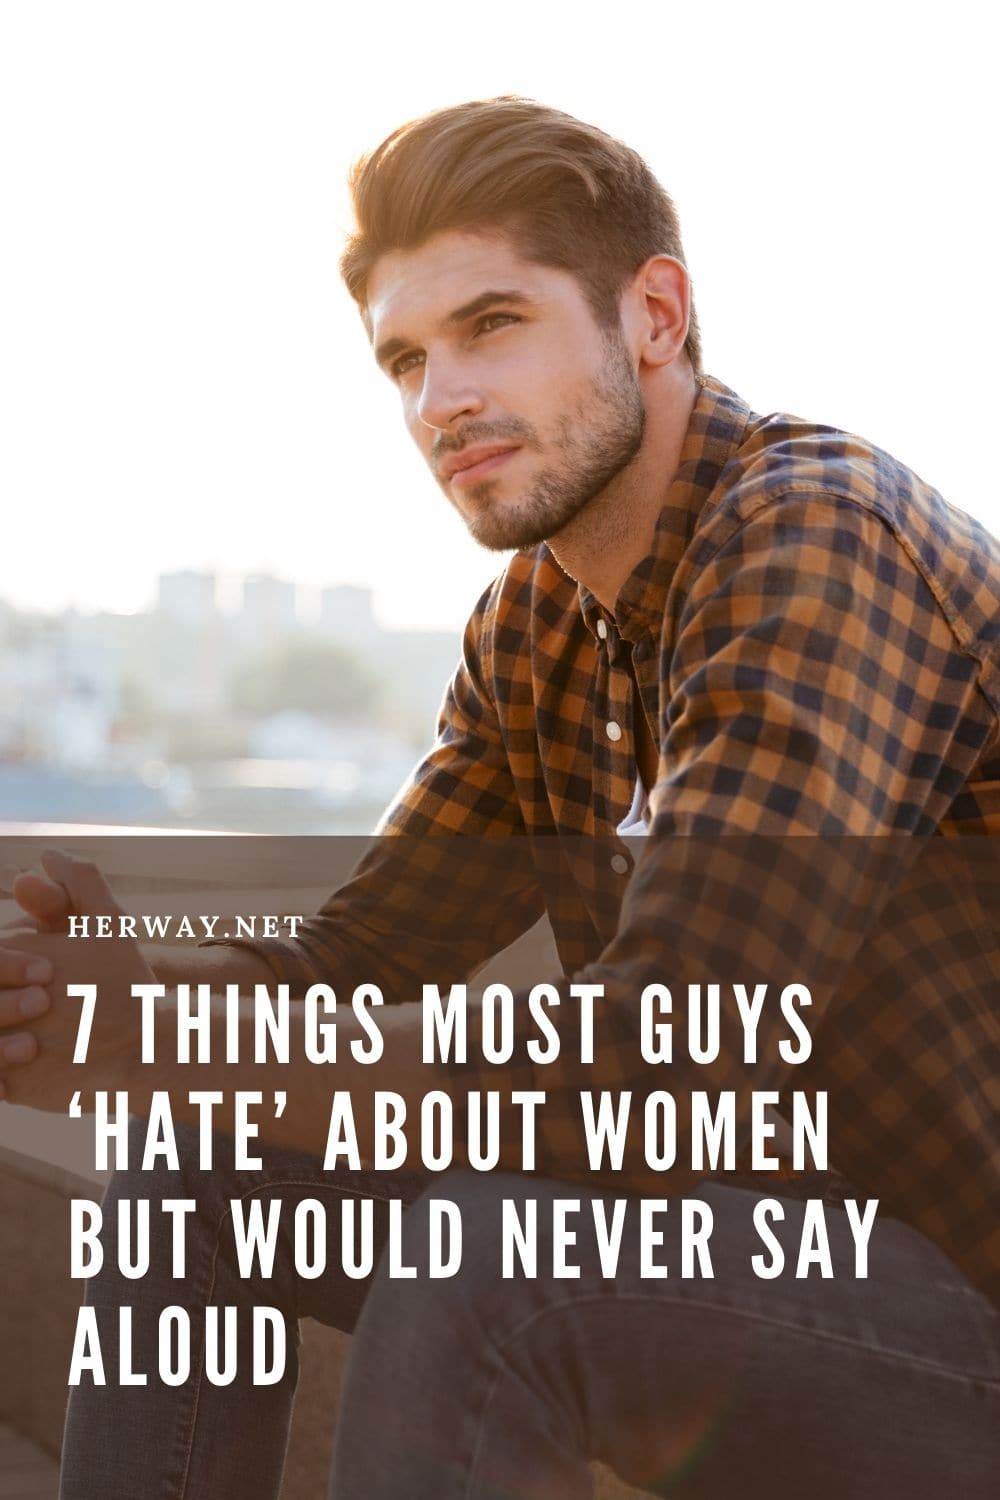 7 Things Most Guys ‘Hate’ About Women But Would Never Say Aloud